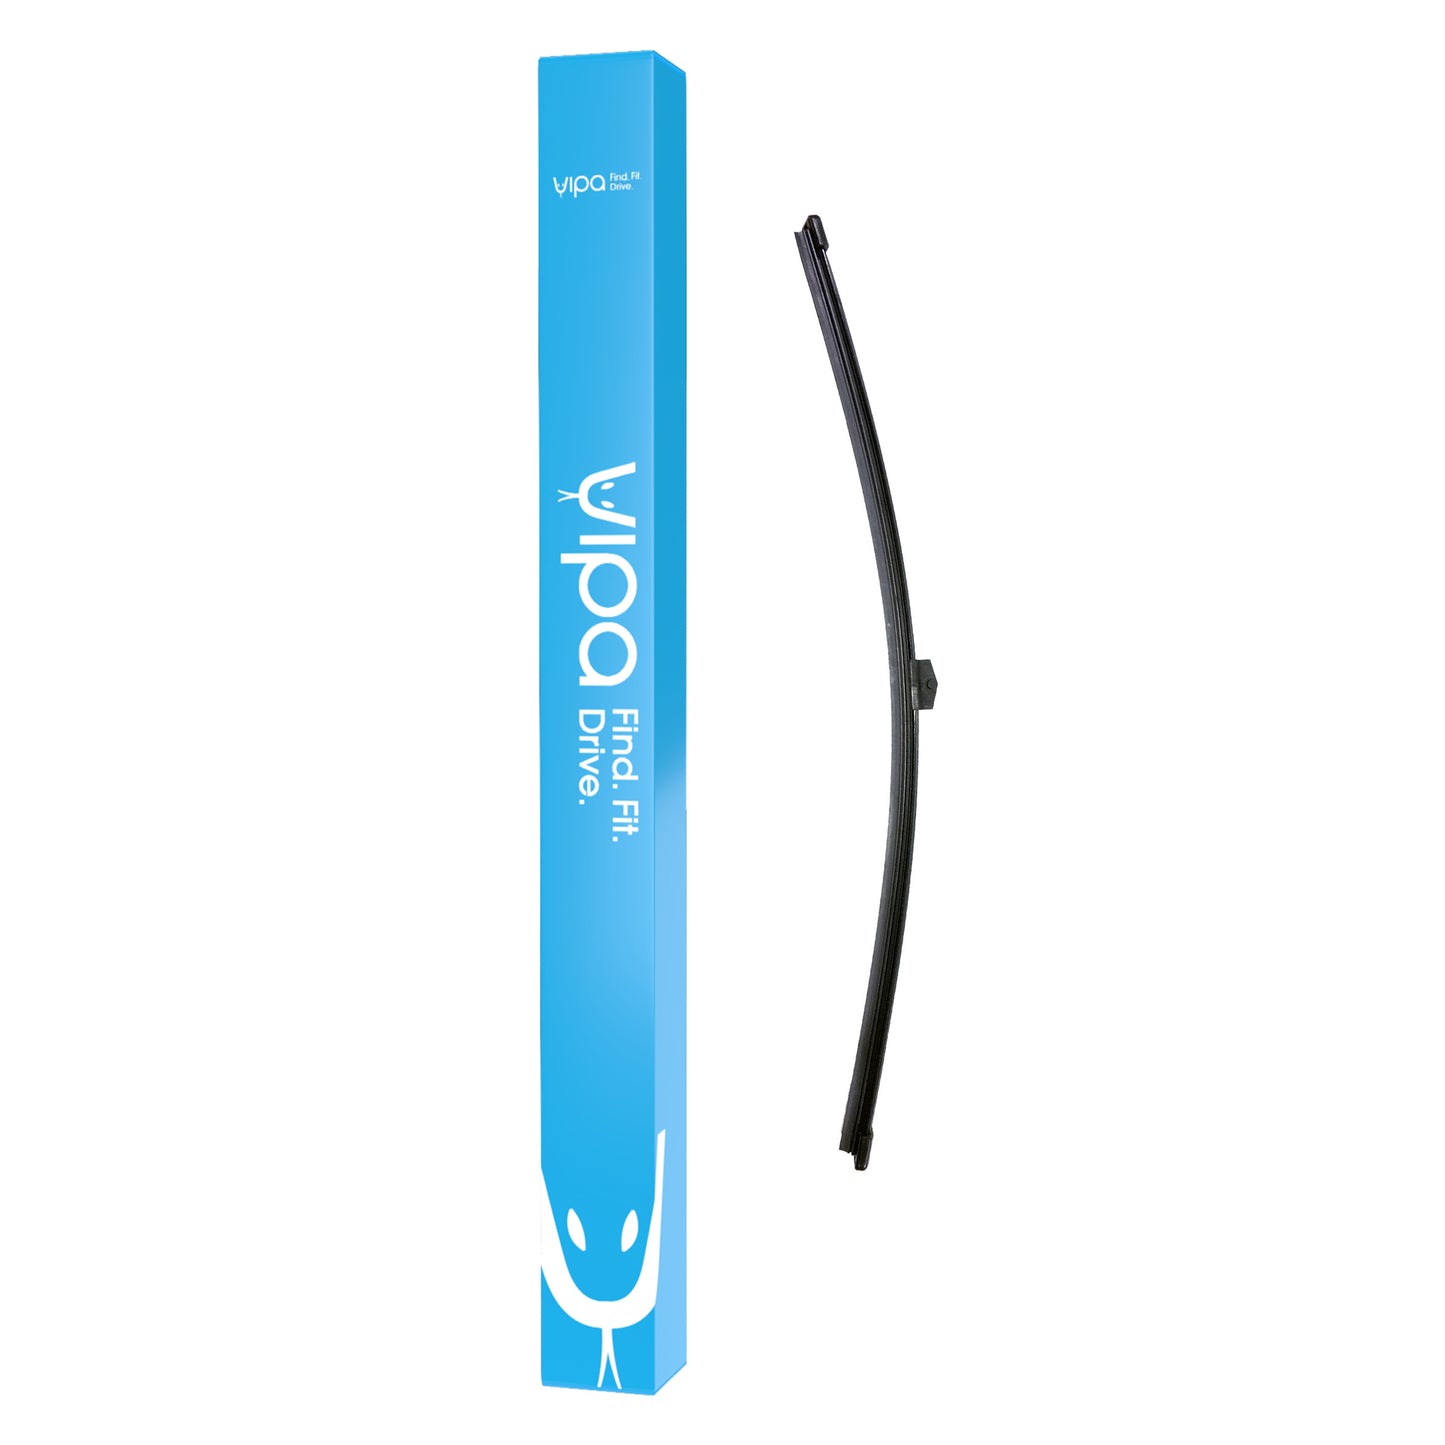 AUDI A6 Allroad Estate May 2006 to Aug 2011Rear Wiper Blade 